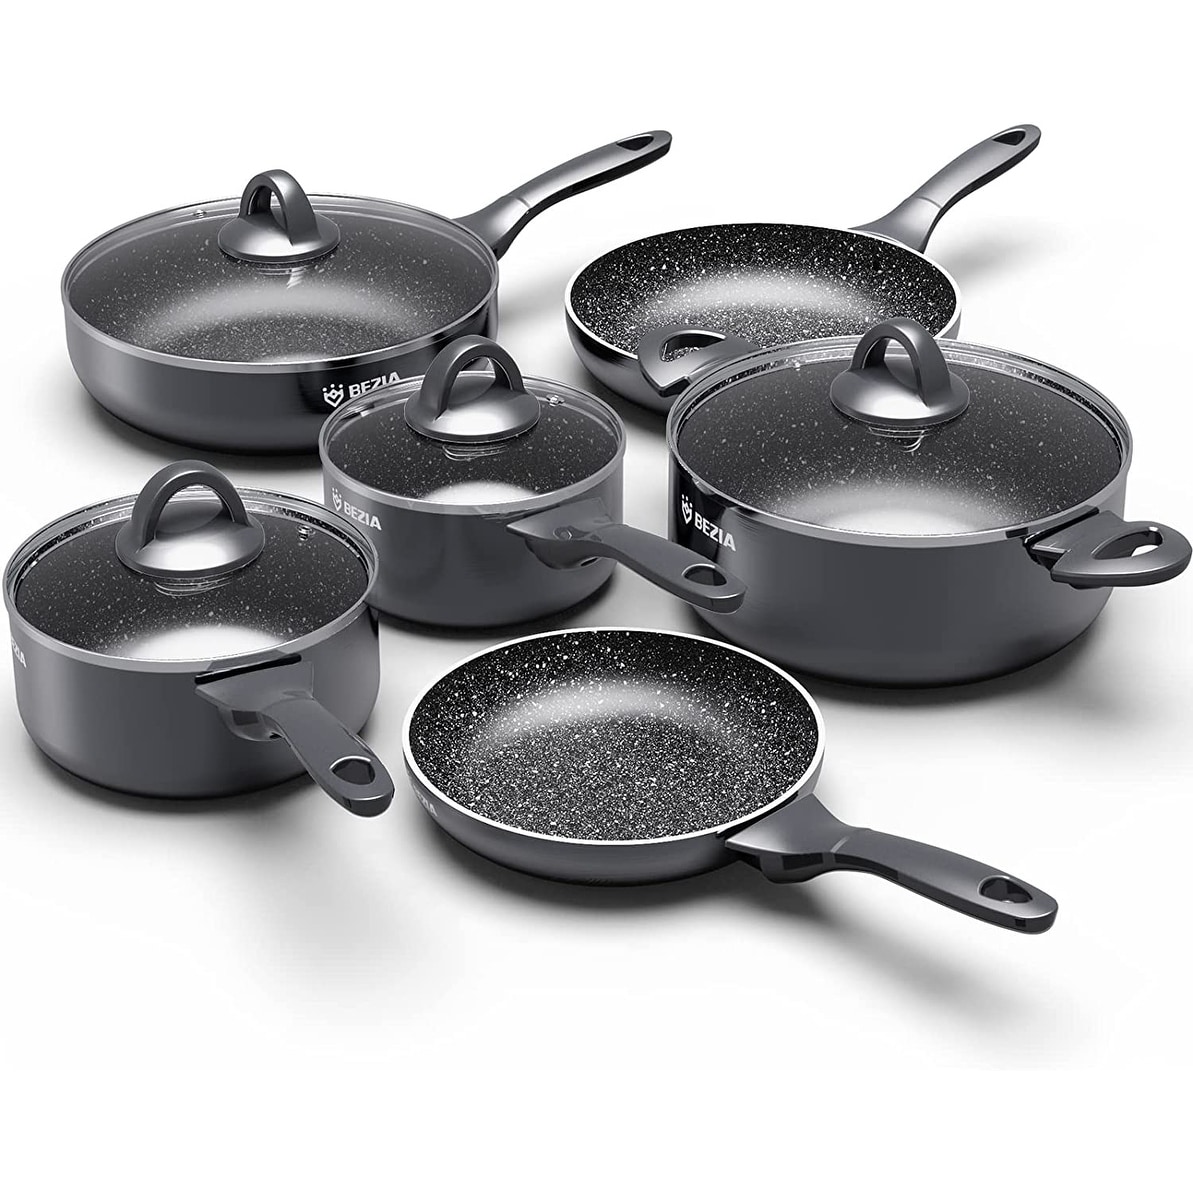 https://ak1.ostkcdn.com/images/products/is/images/direct/b700221b7bedd397c779eb0a8d4607d7f011298a/Pots-and-Pans-Set-Nonstick%2C-BEZIA-Induction-Cookware-10-Piece%2C-Nonstick-Cookware-Sets-Dishwasher-Safe.jpg